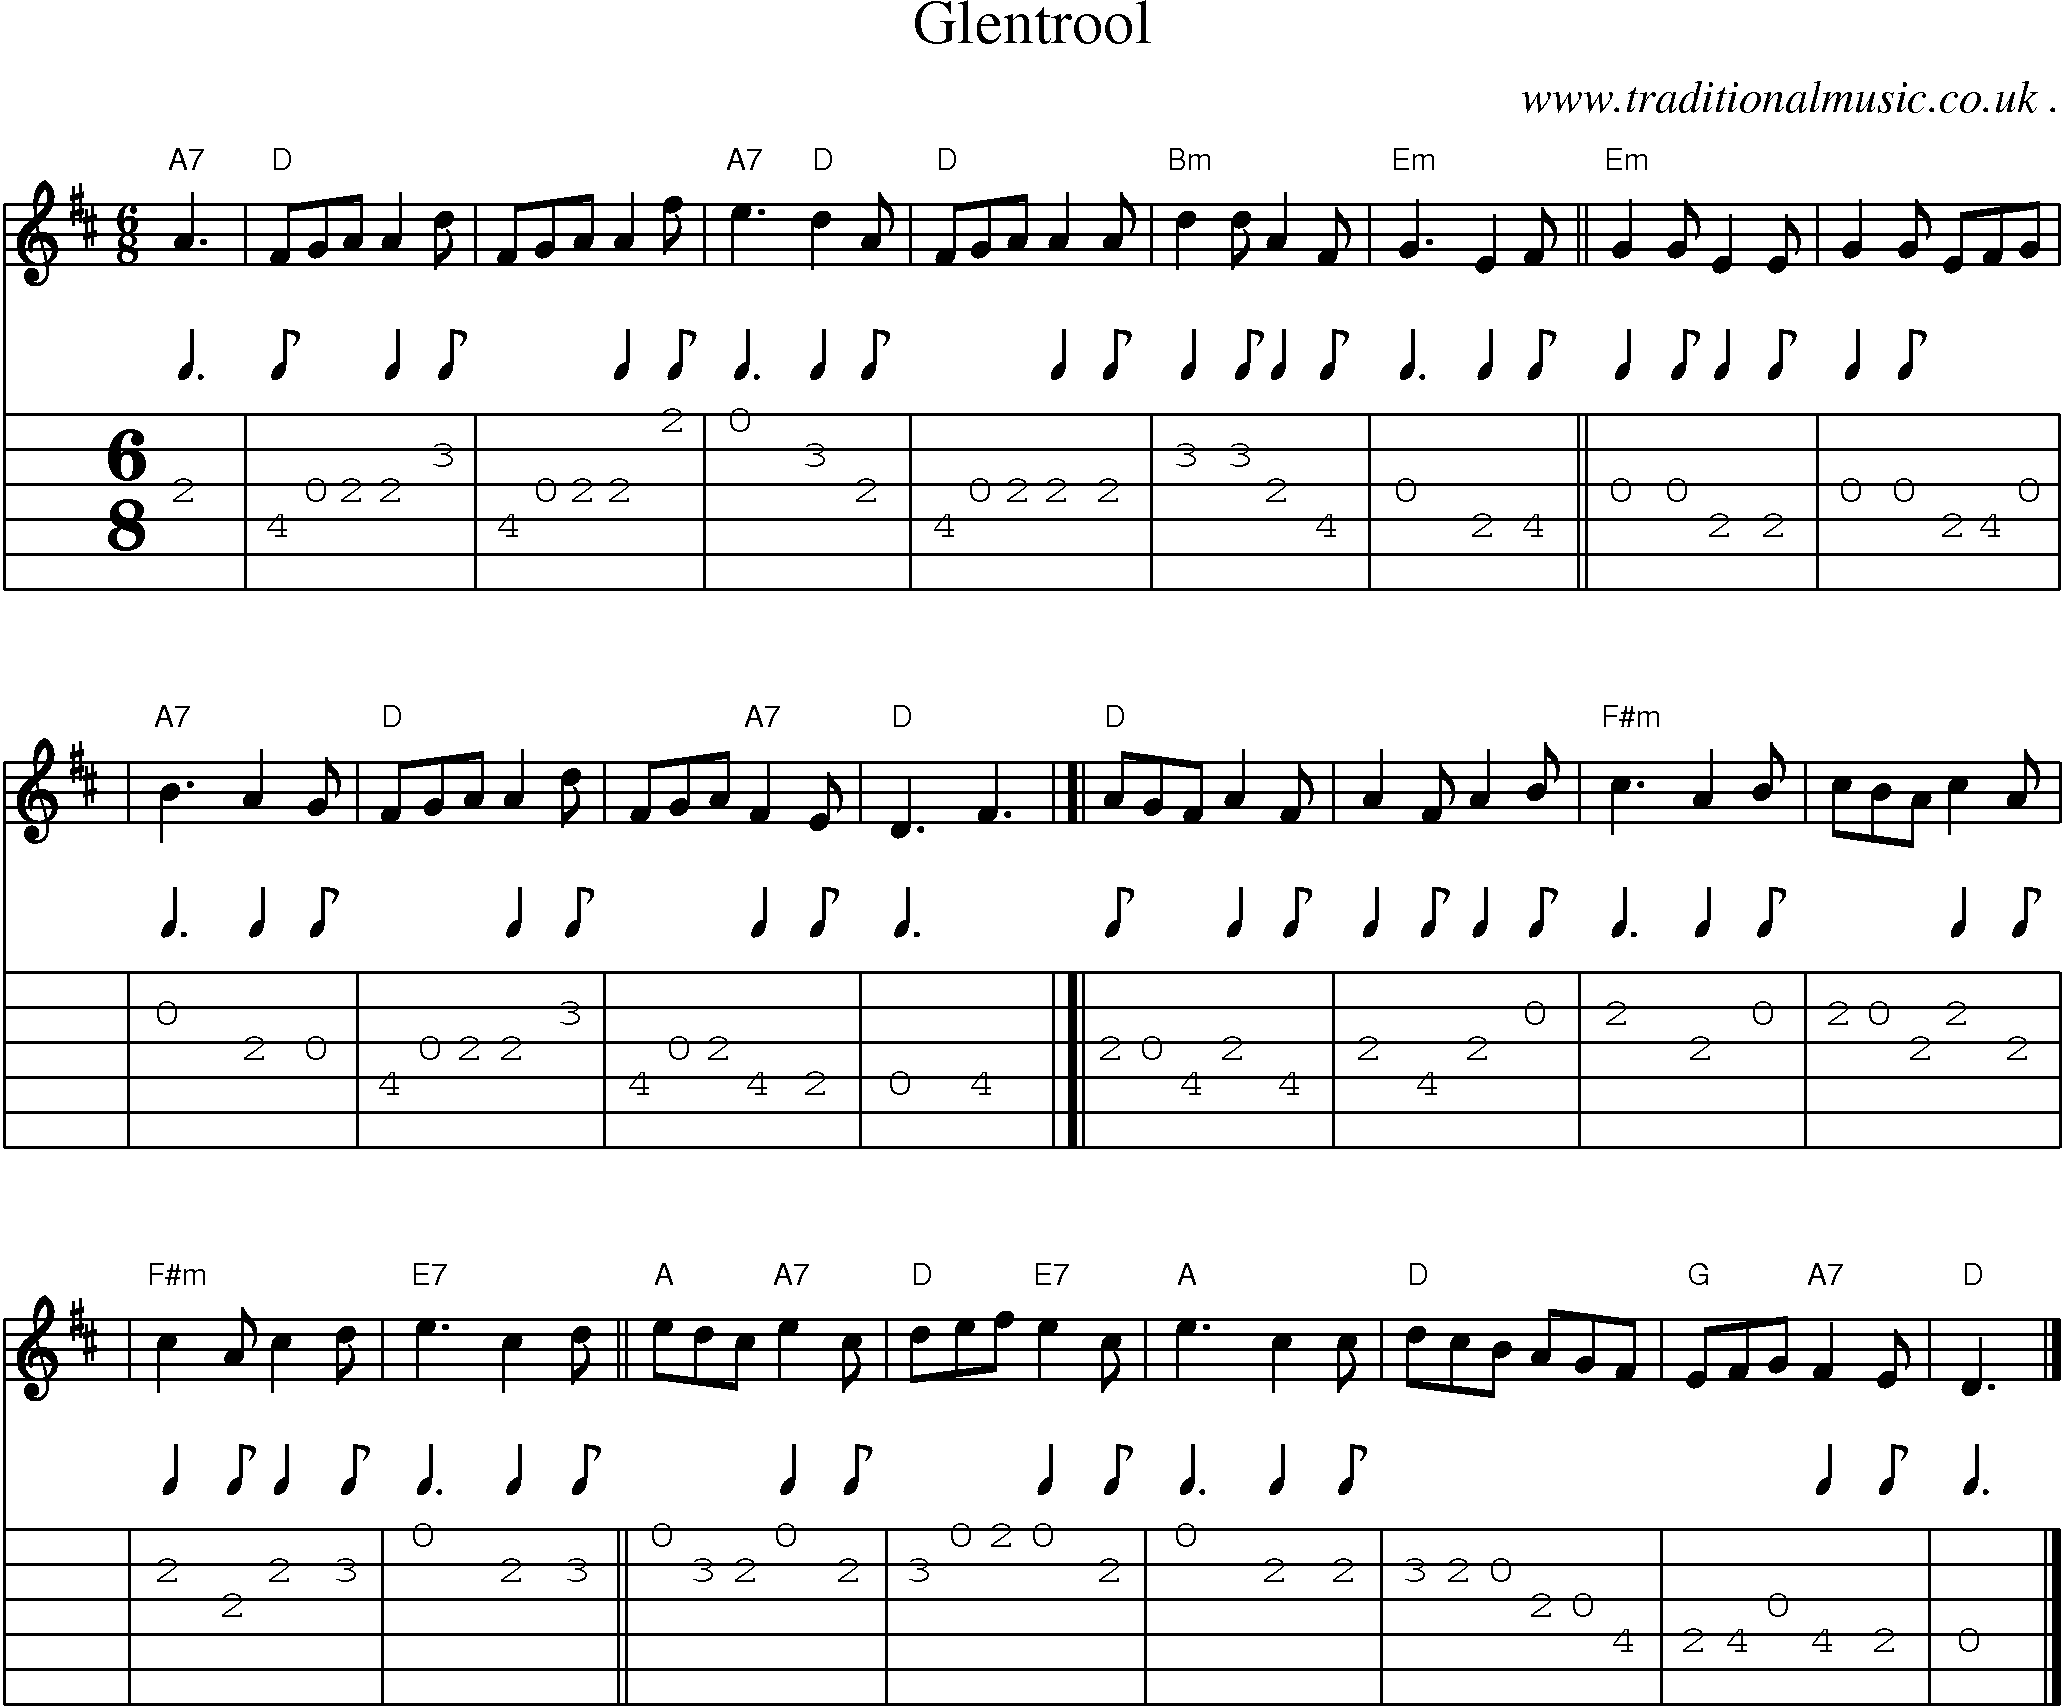 Sheet-music  score, Chords and Guitar Tabs for Glentrool